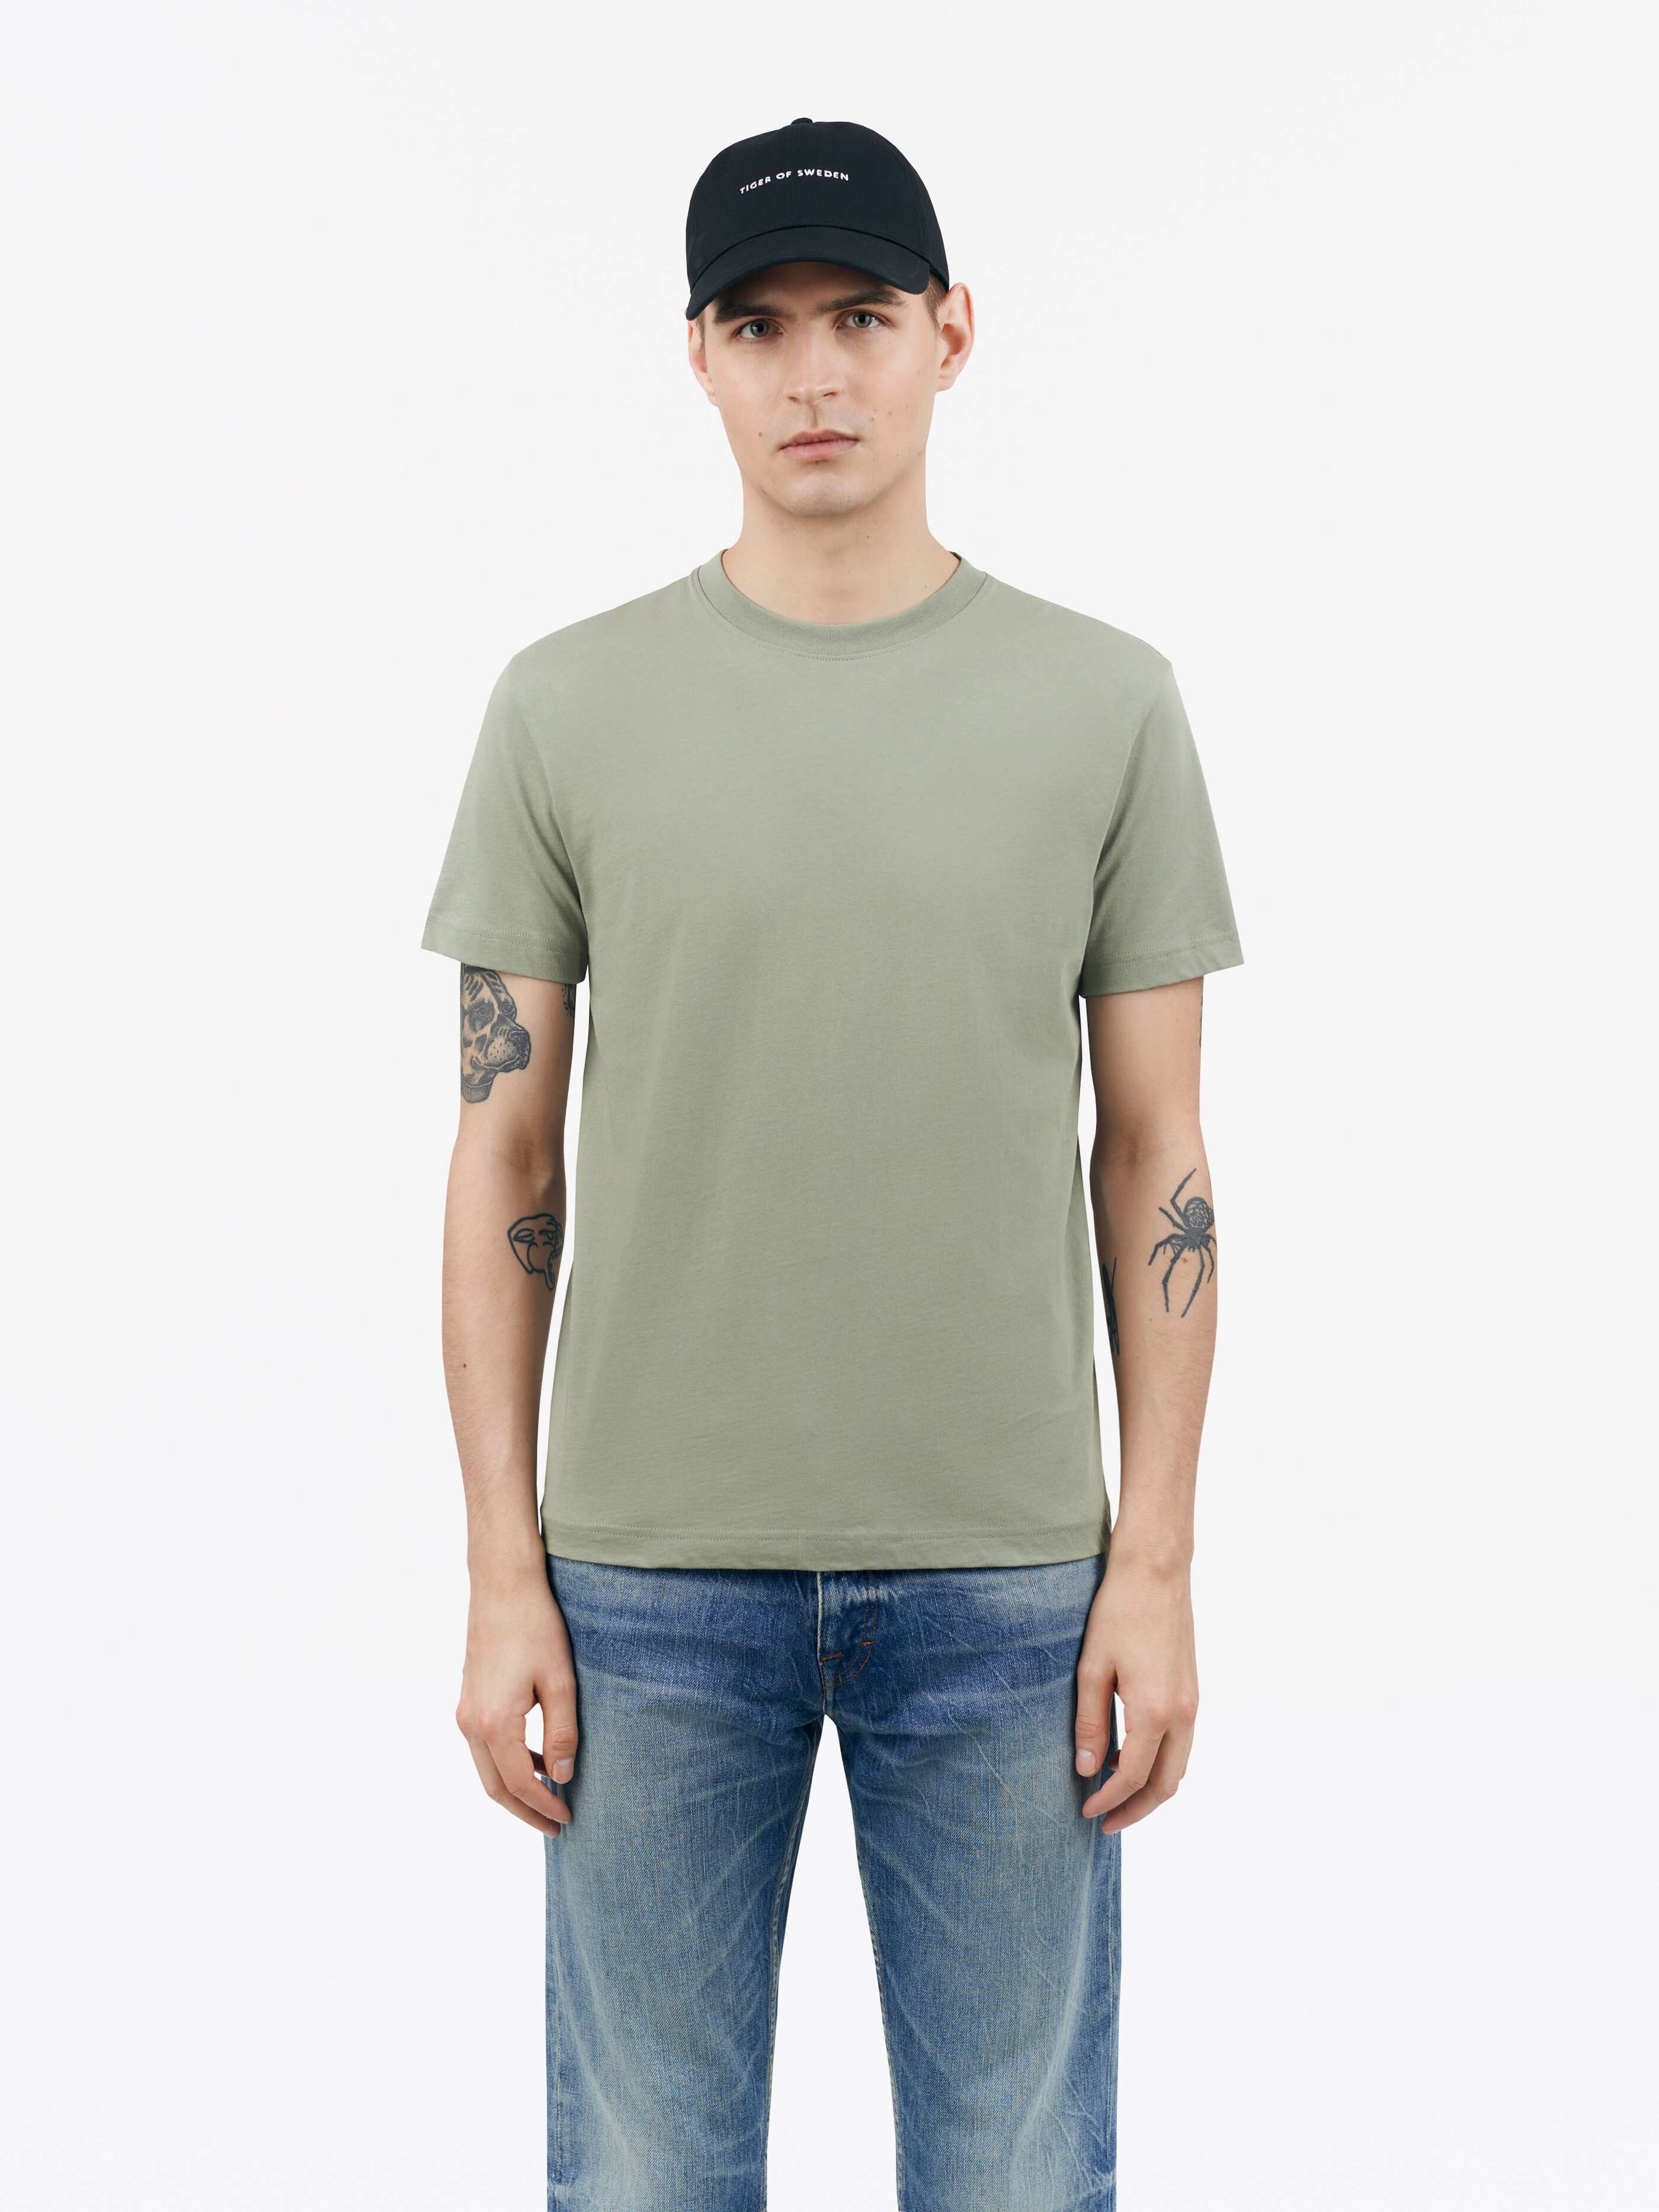 TIGER OF SWEDEN Dillan T-Shirt in Green T71996003 | Shop from eightywingold an official brand partner for Tiger of Sweden Canada and US.